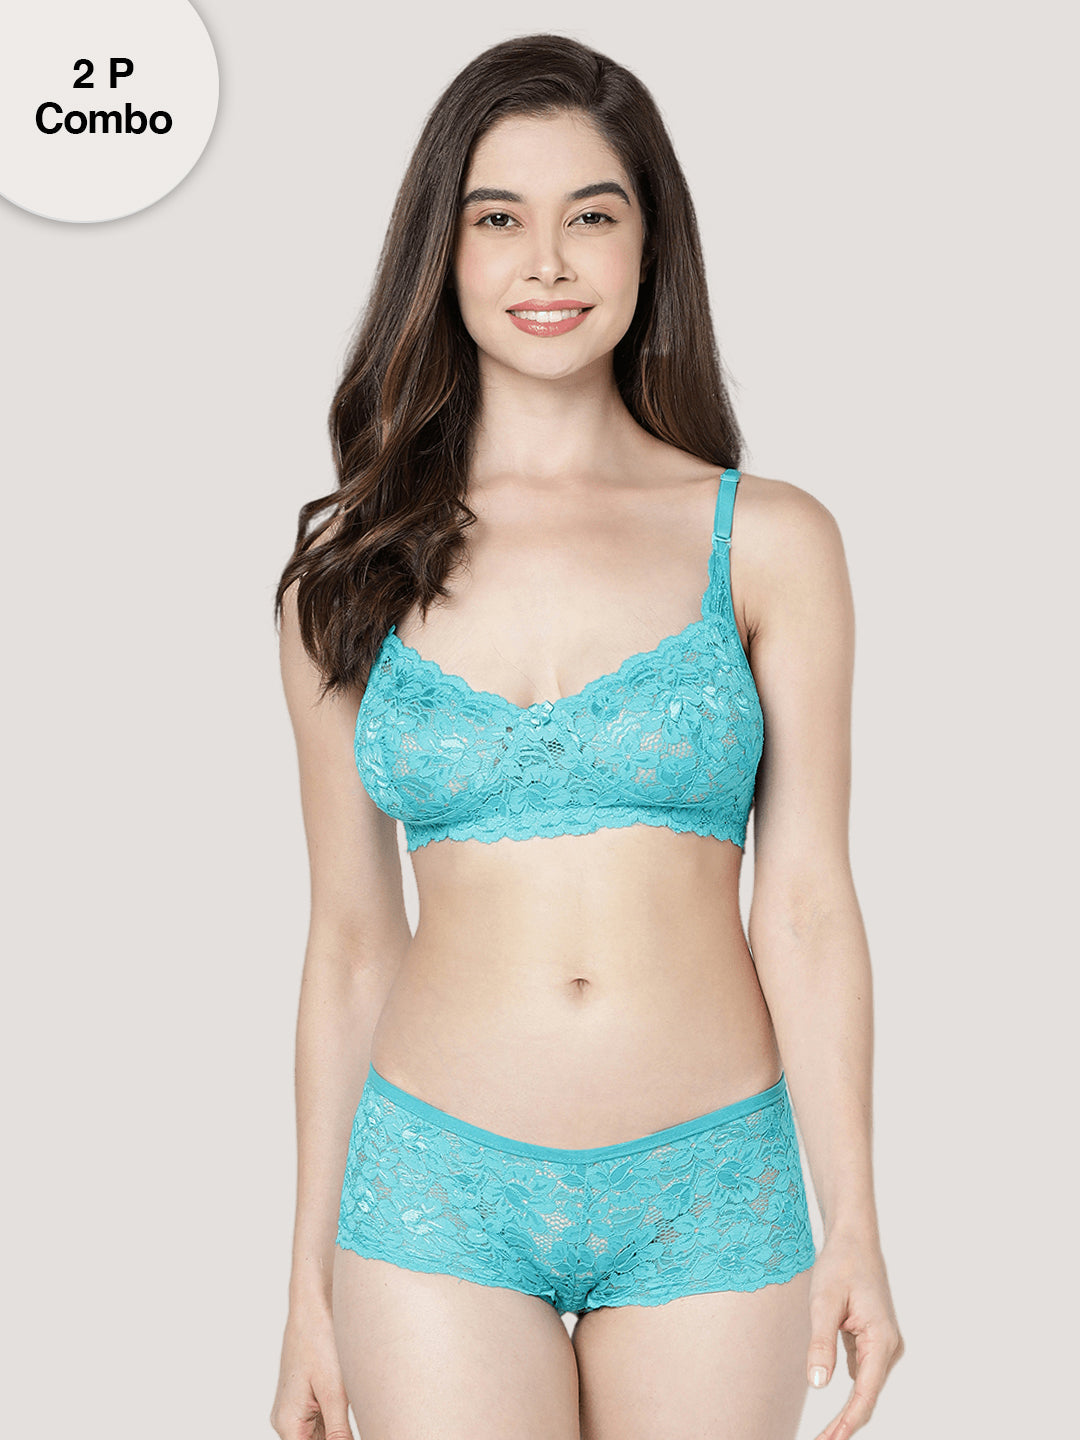 Any Colour Ladies Bra And Panty Set at Best Price in Delhi